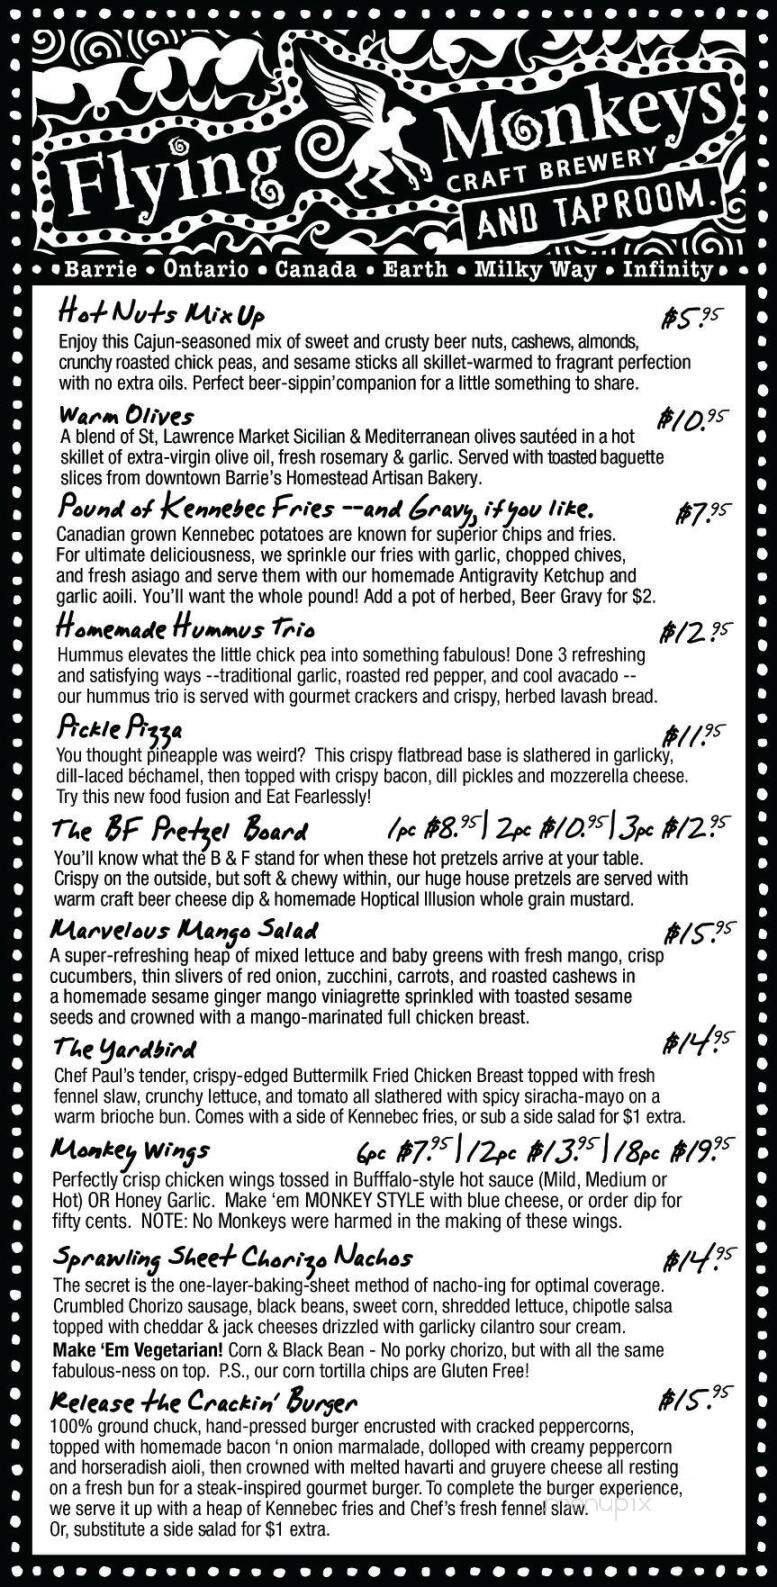 Flying Monkeys Craft Brewery - Barrie, ON